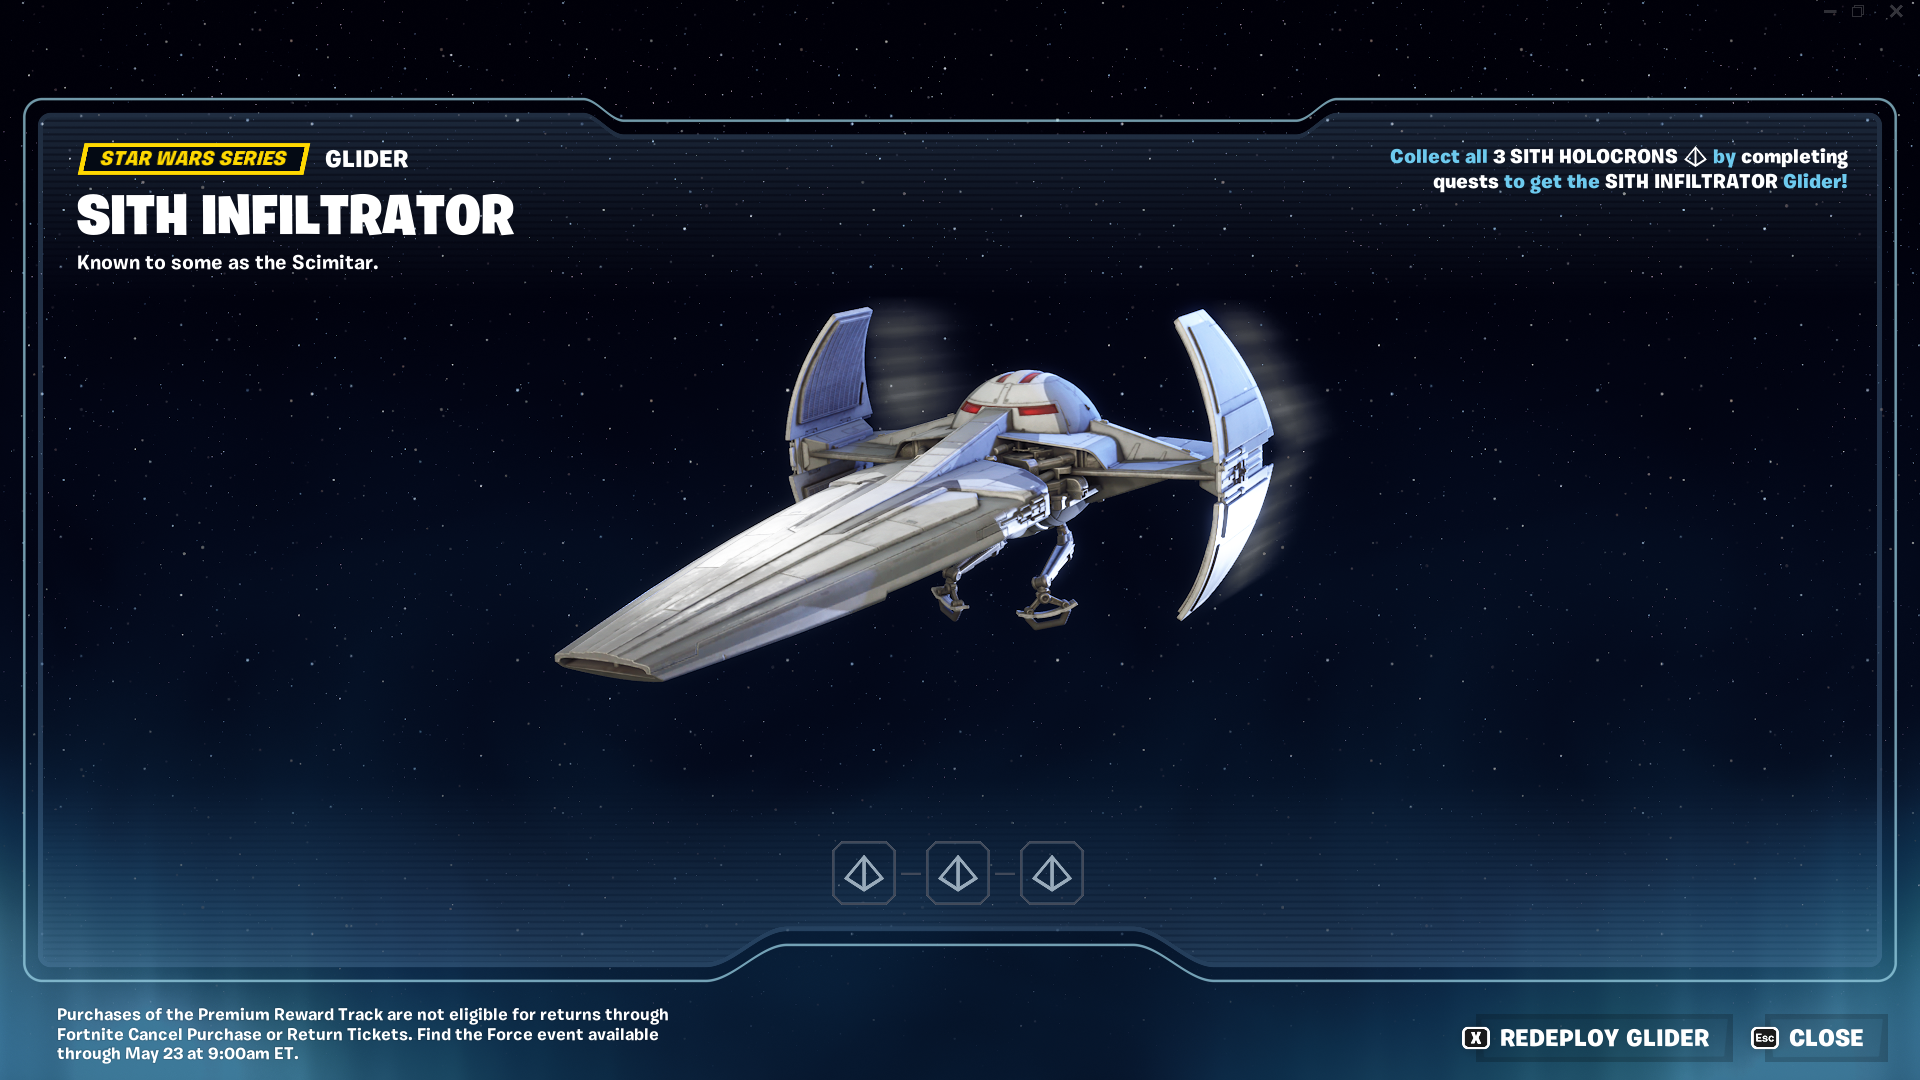 Fortnite Find the Force: How to get the Sith Infiltrator Glider